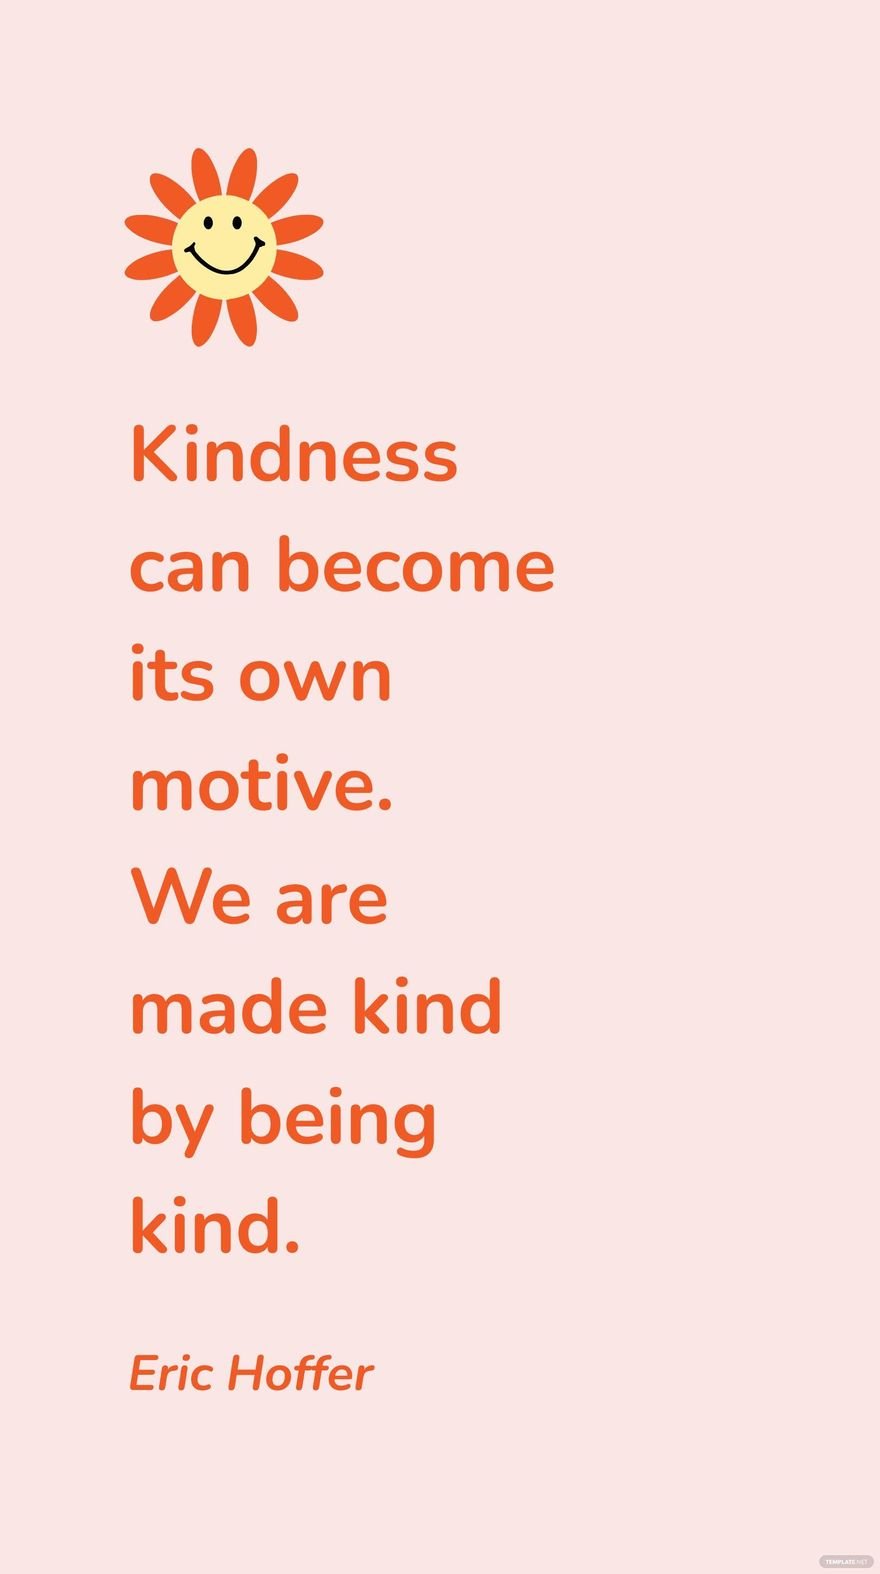 Eric Hoffer - Kindness can become its own motive. We are made kind by being kind.